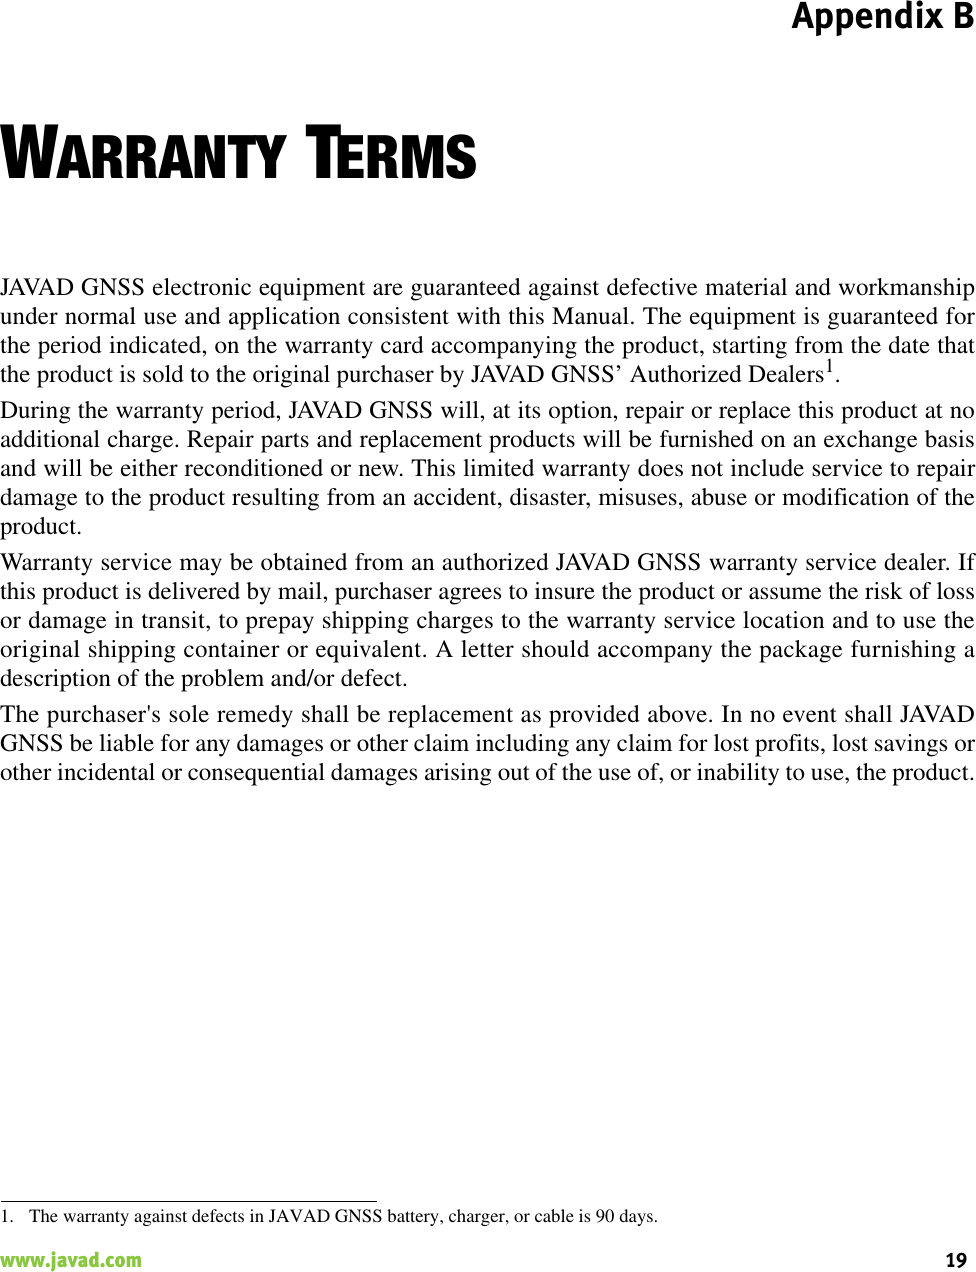 Appendix B19www.javad.com                                                                                                                                                    WARRANTY TERMSJAVAD GNSS electronic equipment are guaranteed against defective material and workmanshipunder normal use and application consistent with this Manual. The equipment is guaranteed forthe period indicated, on the warranty card accompanying the product, starting from the date thatthe product is sold to the original purchaser by JAVAD GNSS’ Authorized Dealers1.During the warranty period, JAVAD GNSS will, at its option, repair or replace this product at noadditional charge. Repair parts and replacement products will be furnished on an exchange basisand will be either reconditioned or new. This limited warranty does not include service to repairdamage to the product resulting from an accident, disaster, misuses, abuse or modification of theproduct.Warranty service may be obtained from an authorized JAVAD GNSS warranty service dealer. Ifthis product is delivered by mail, purchaser agrees to insure the product or assume the risk of lossor damage in transit, to prepay shipping charges to the warranty service location and to use theoriginal shipping container or equivalent. A letter should accompany the package furnishing adescription of the problem and/or defect.The purchaser&apos;s sole remedy shall be replacement as provided above. In no event shall JAVADGNSS be liable for any damages or other claim including any claim for lost profits, lost savings orother incidental or consequential damages arising out of the use of, or inability to use, the product.1. The warranty against defects in JAVAD GNSS battery, charger, or cable is 90 days.